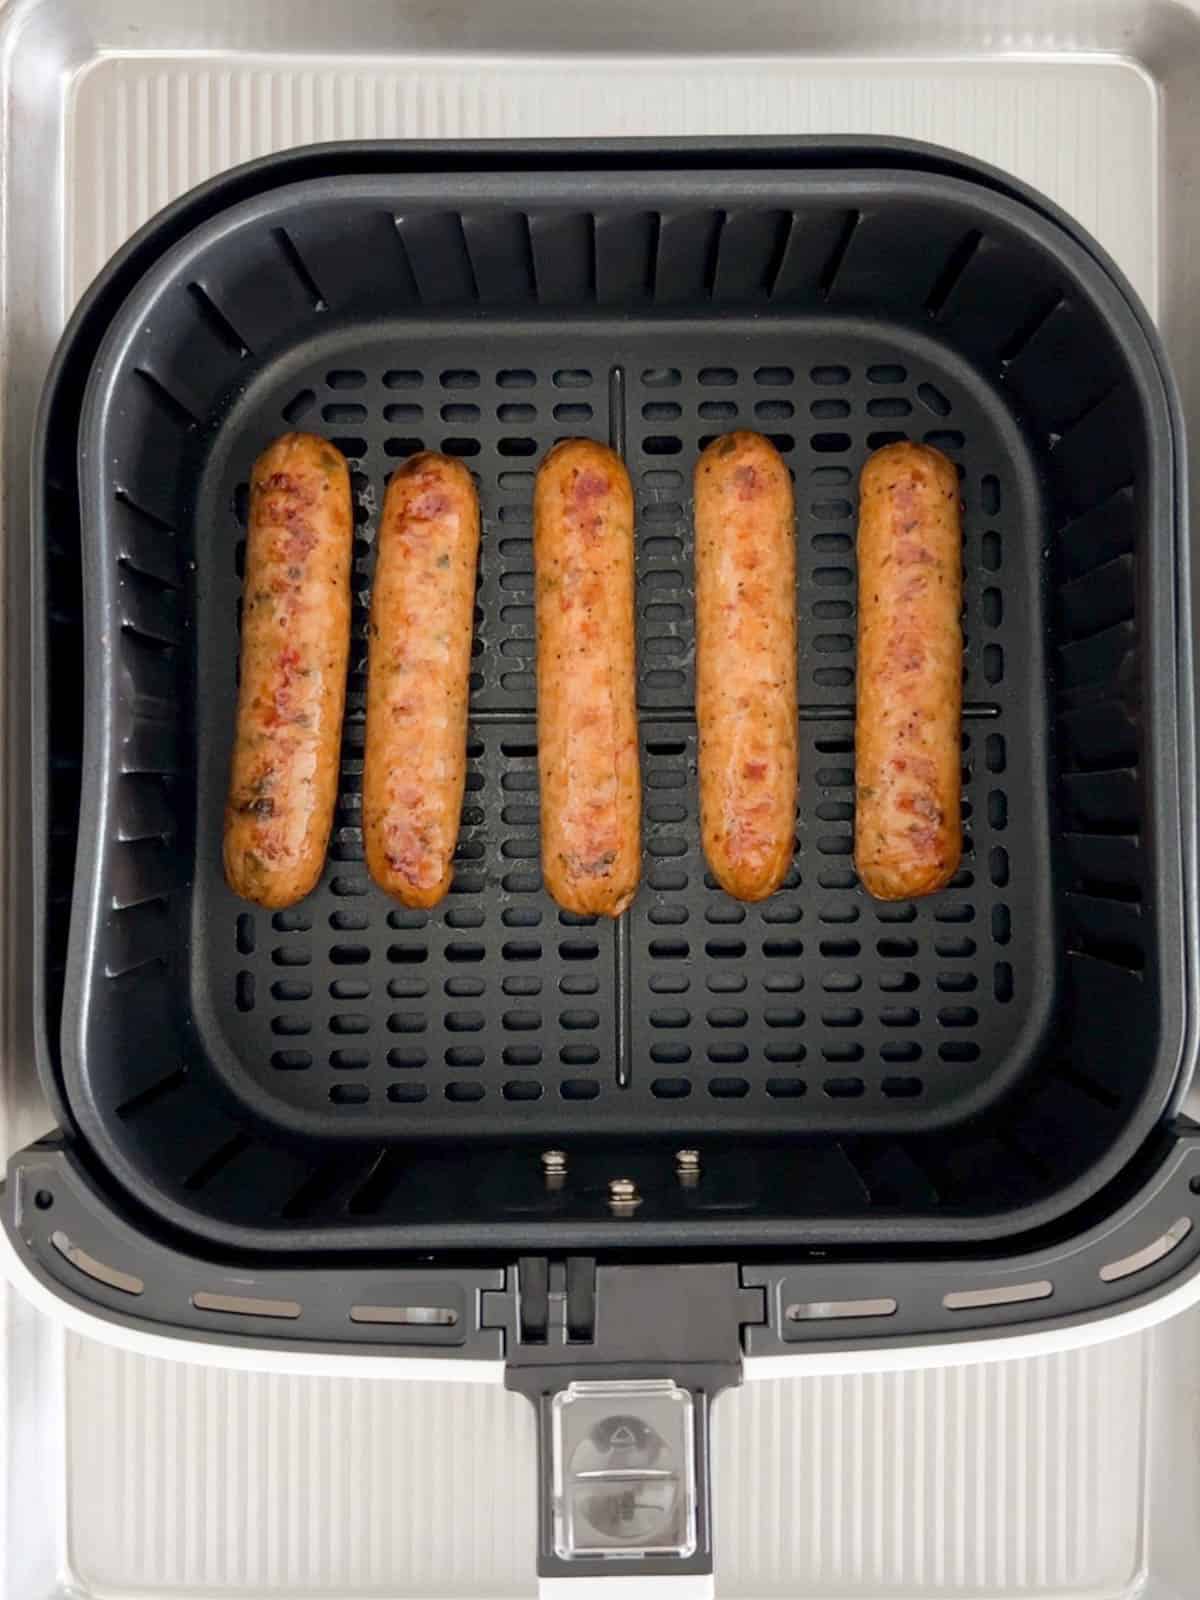 The sausages are air fried until lightly crisp on the outside.